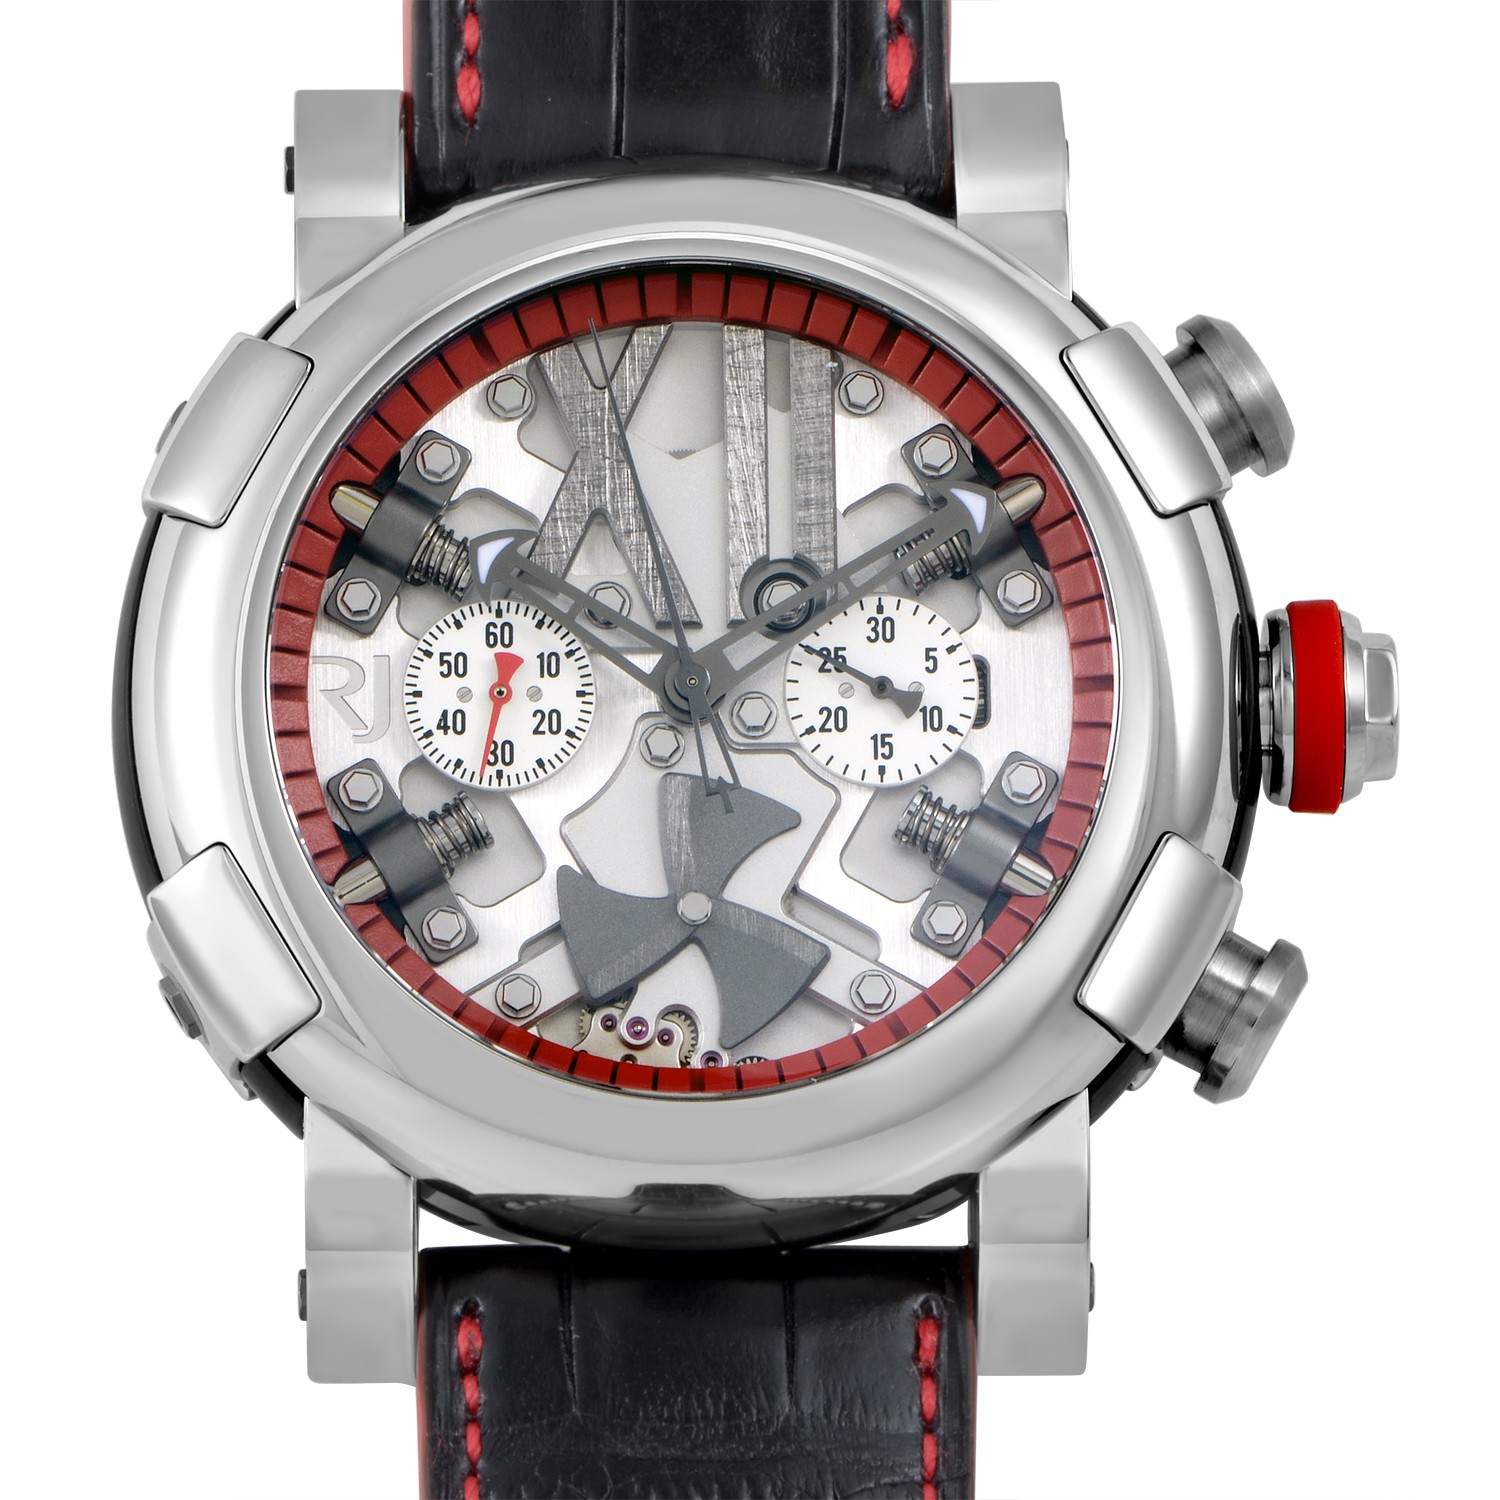 Steampunk Chronograph Red 50mm Automatic in Stainless Steel on Black Crocodile Leather Strap with Skeleton Dial